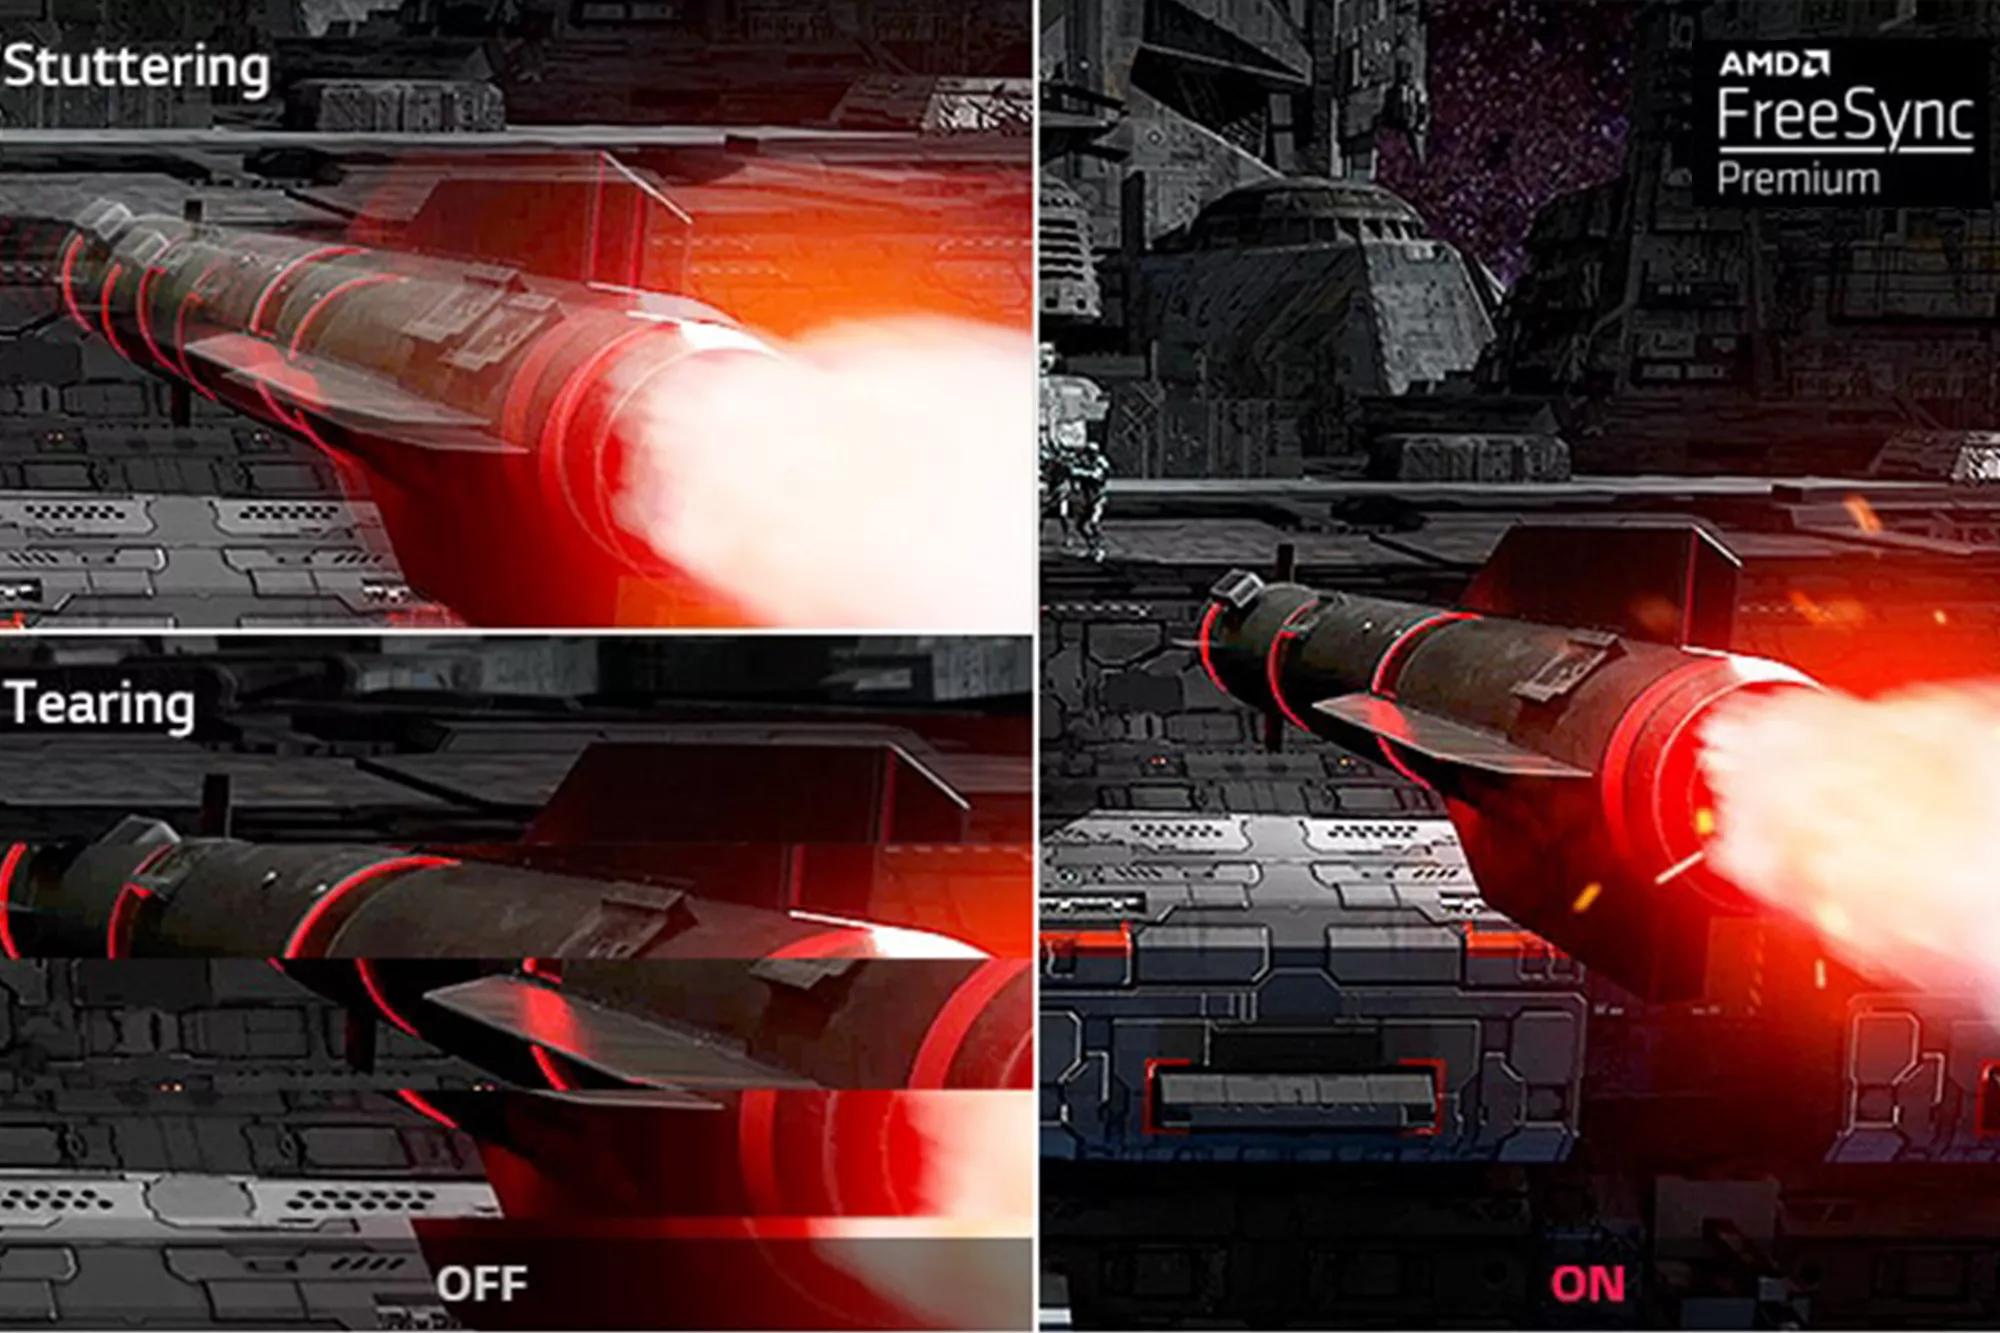 Gaming motion with AMD FreeSync Premium versus OFF